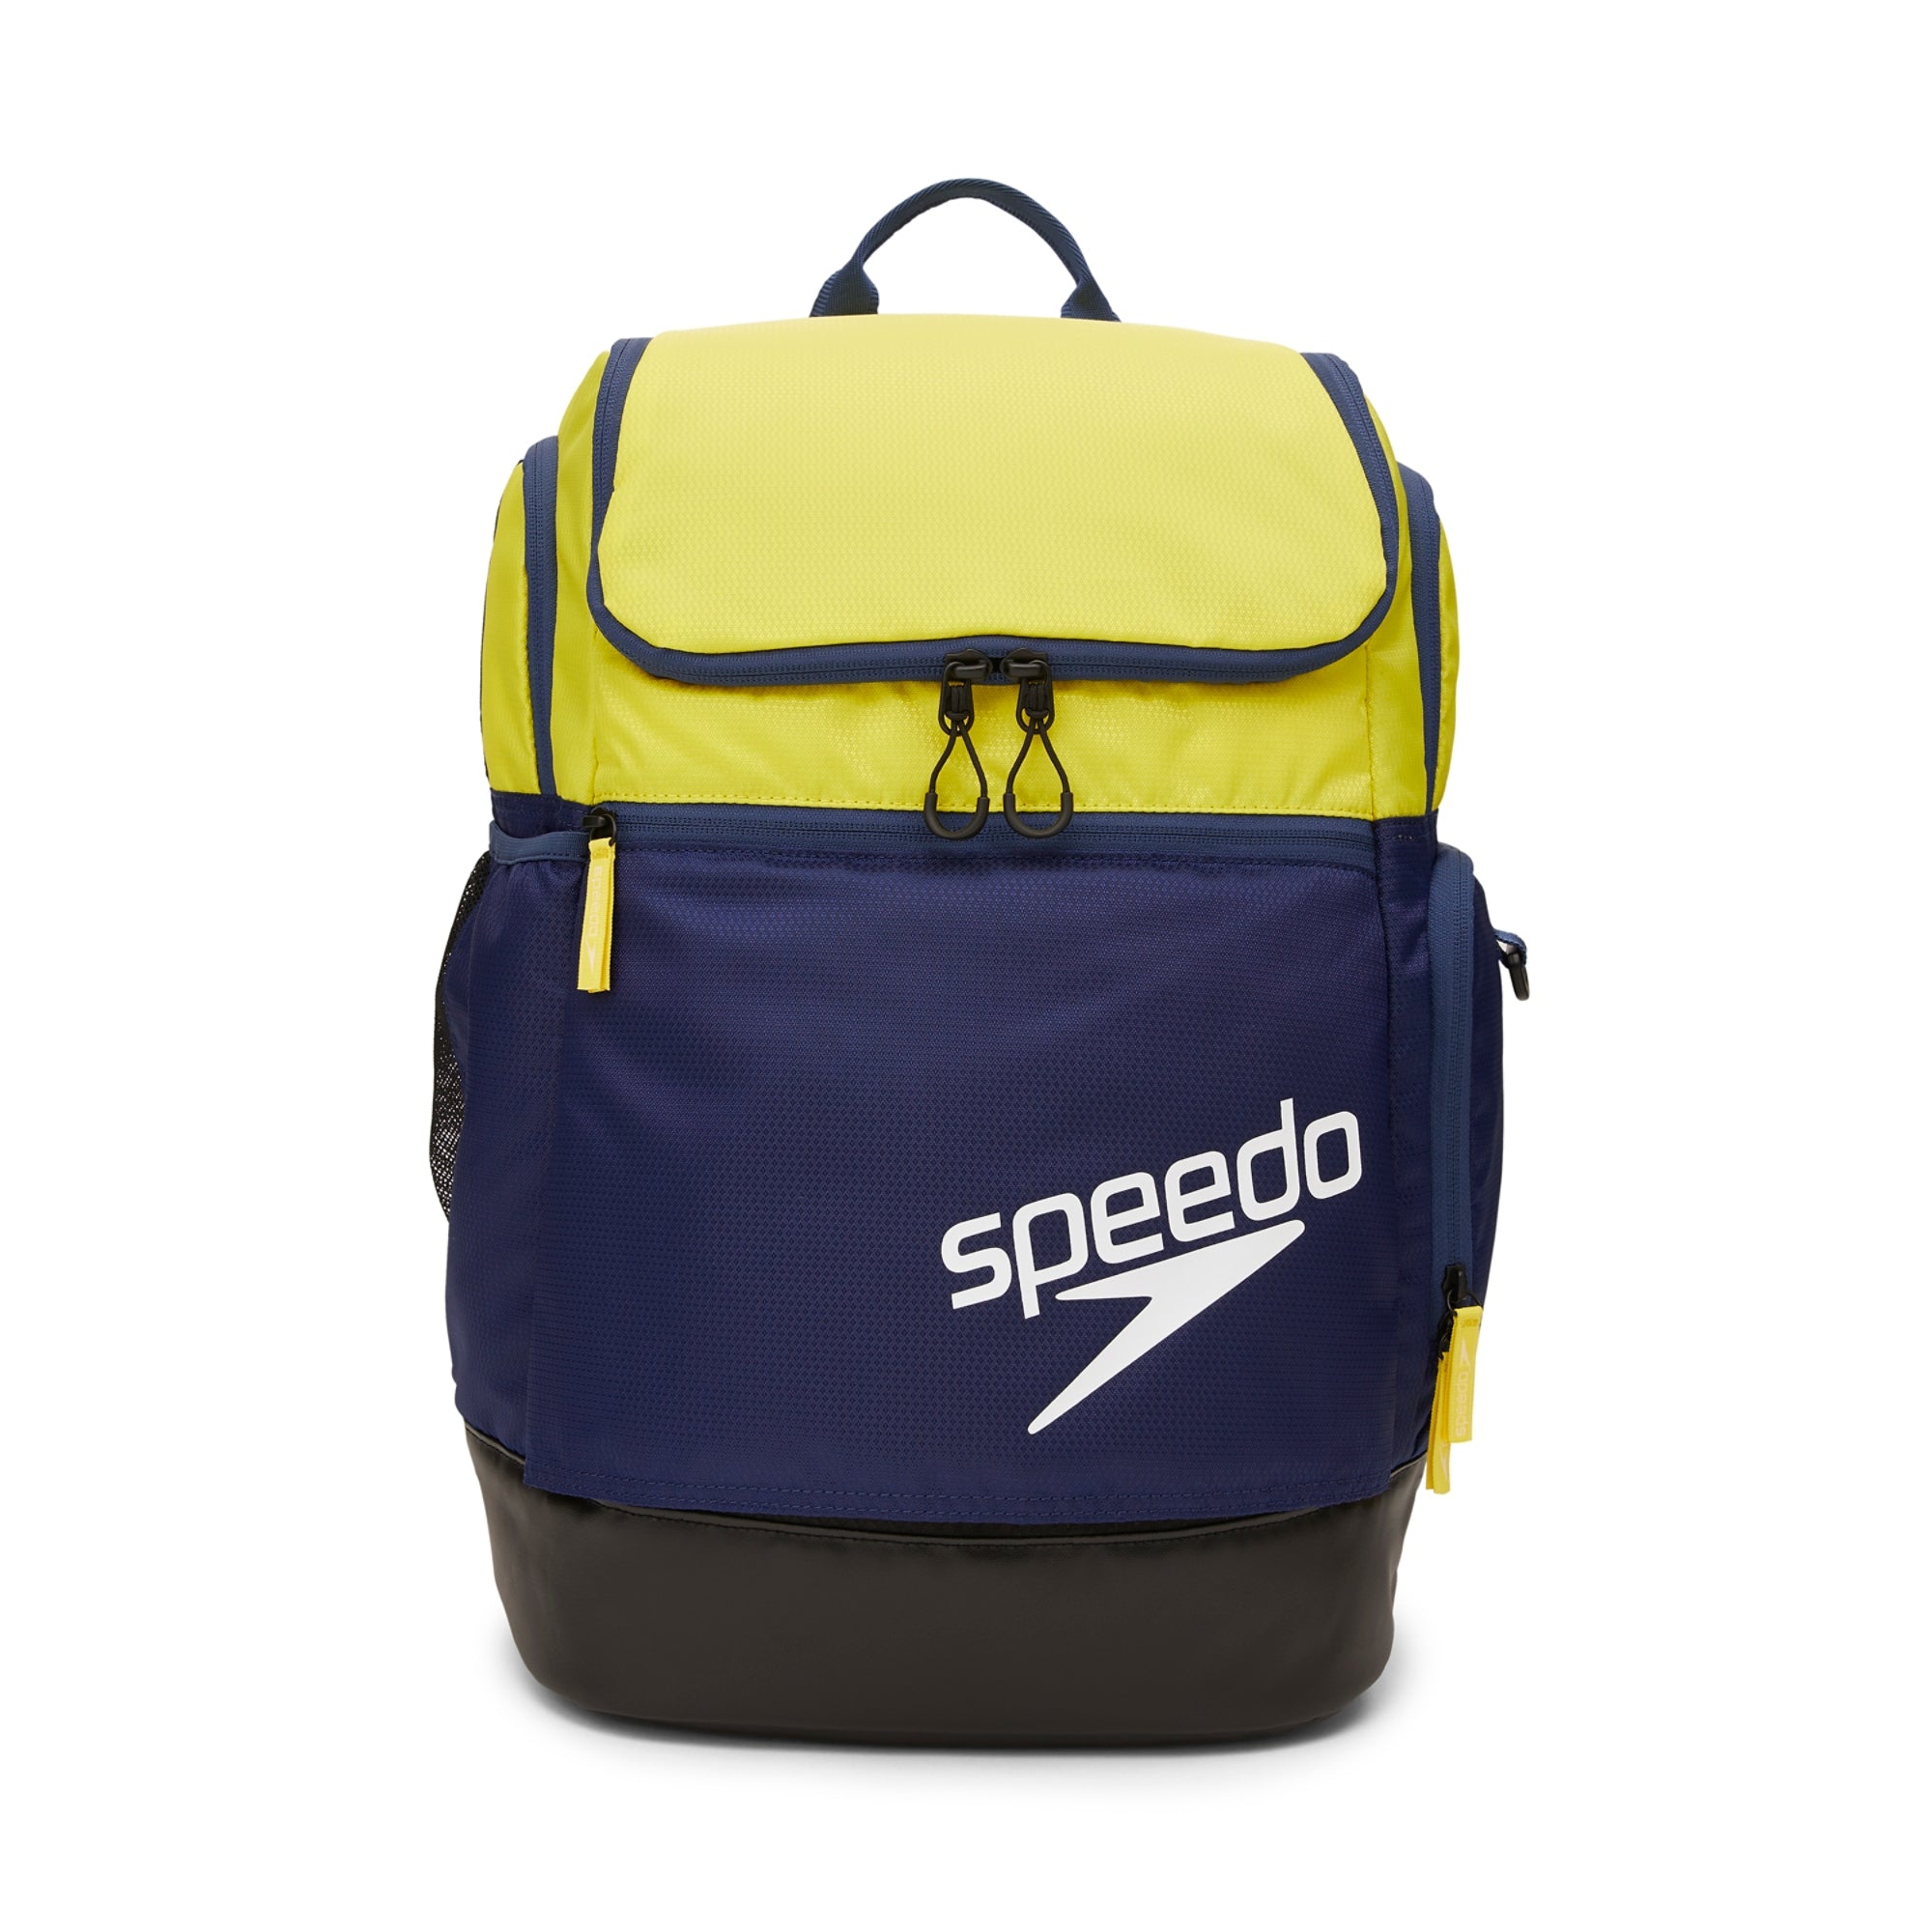 Amazon.com: Speedo UnisexAdult Large Teamster Backpack 35Liter One Size,  Blue/Ceramic 2.0 : Sports & Outdoors